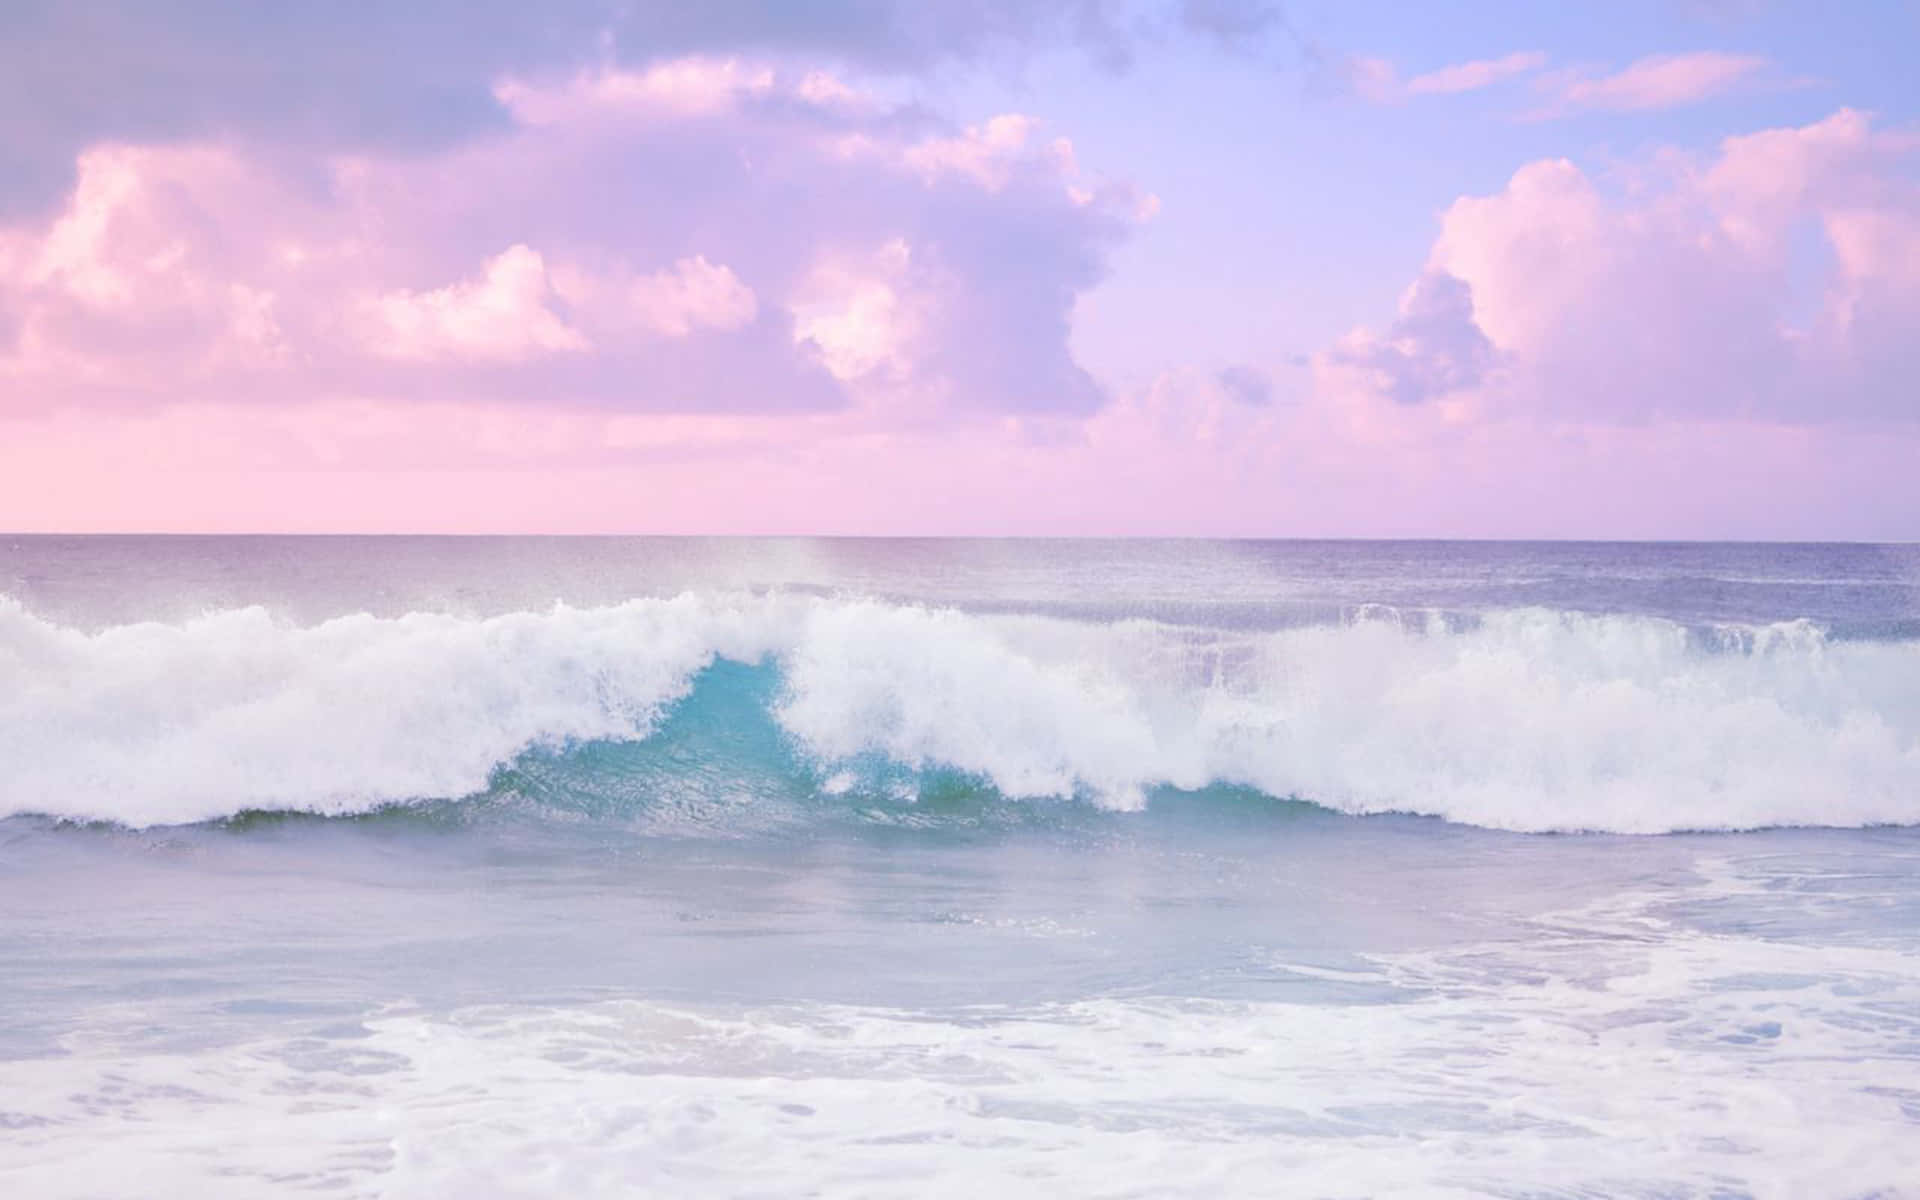 Download Waving Sea With Aesthetic Pink Sky Picture | Wallpapers.com